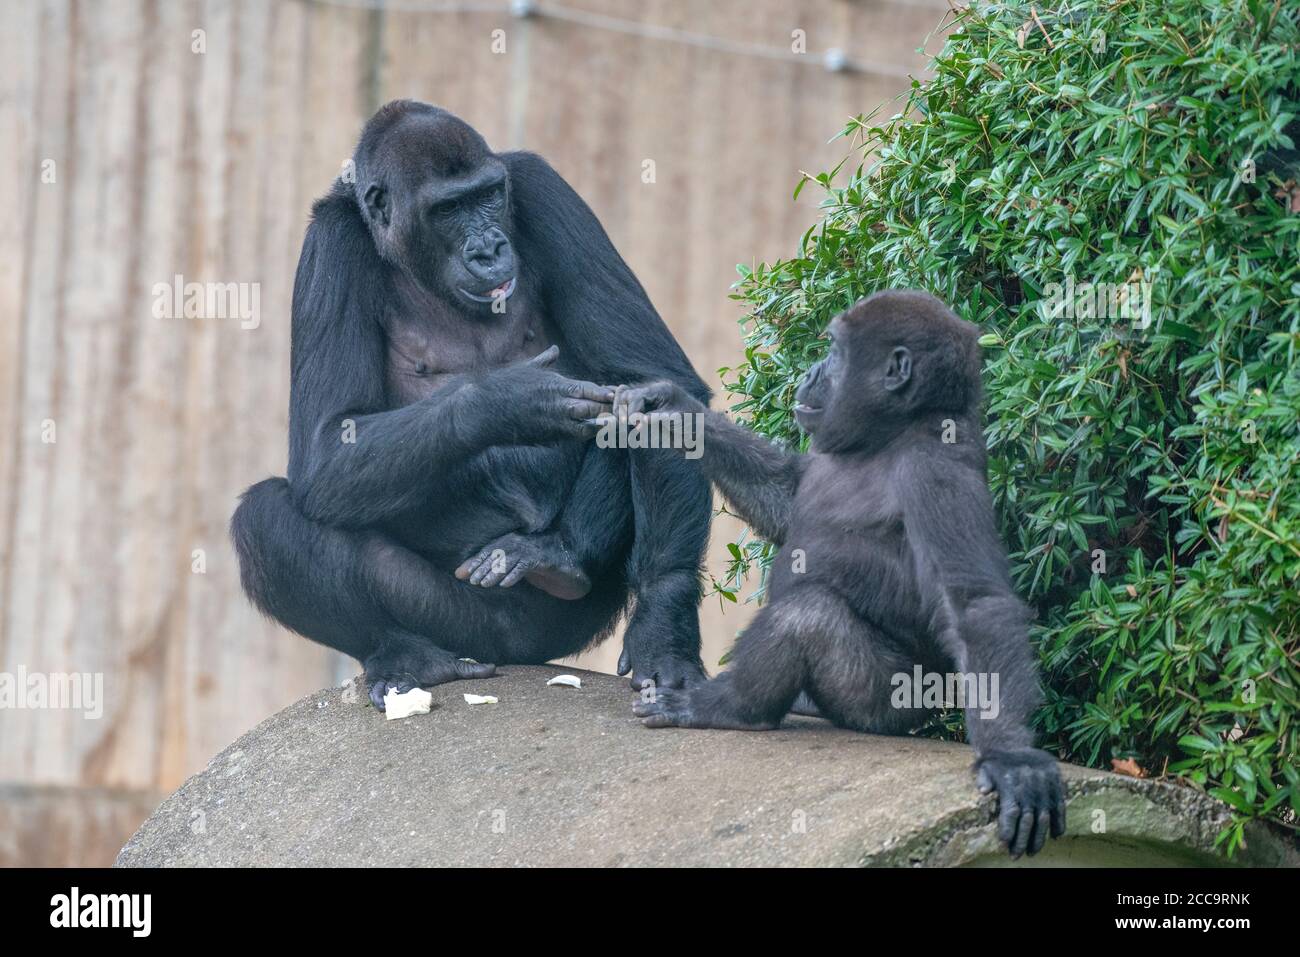 Western lowland gorillas Kibibi, left, and Moke in their yard at the National Zoo in Washington, DC. Stock Photo